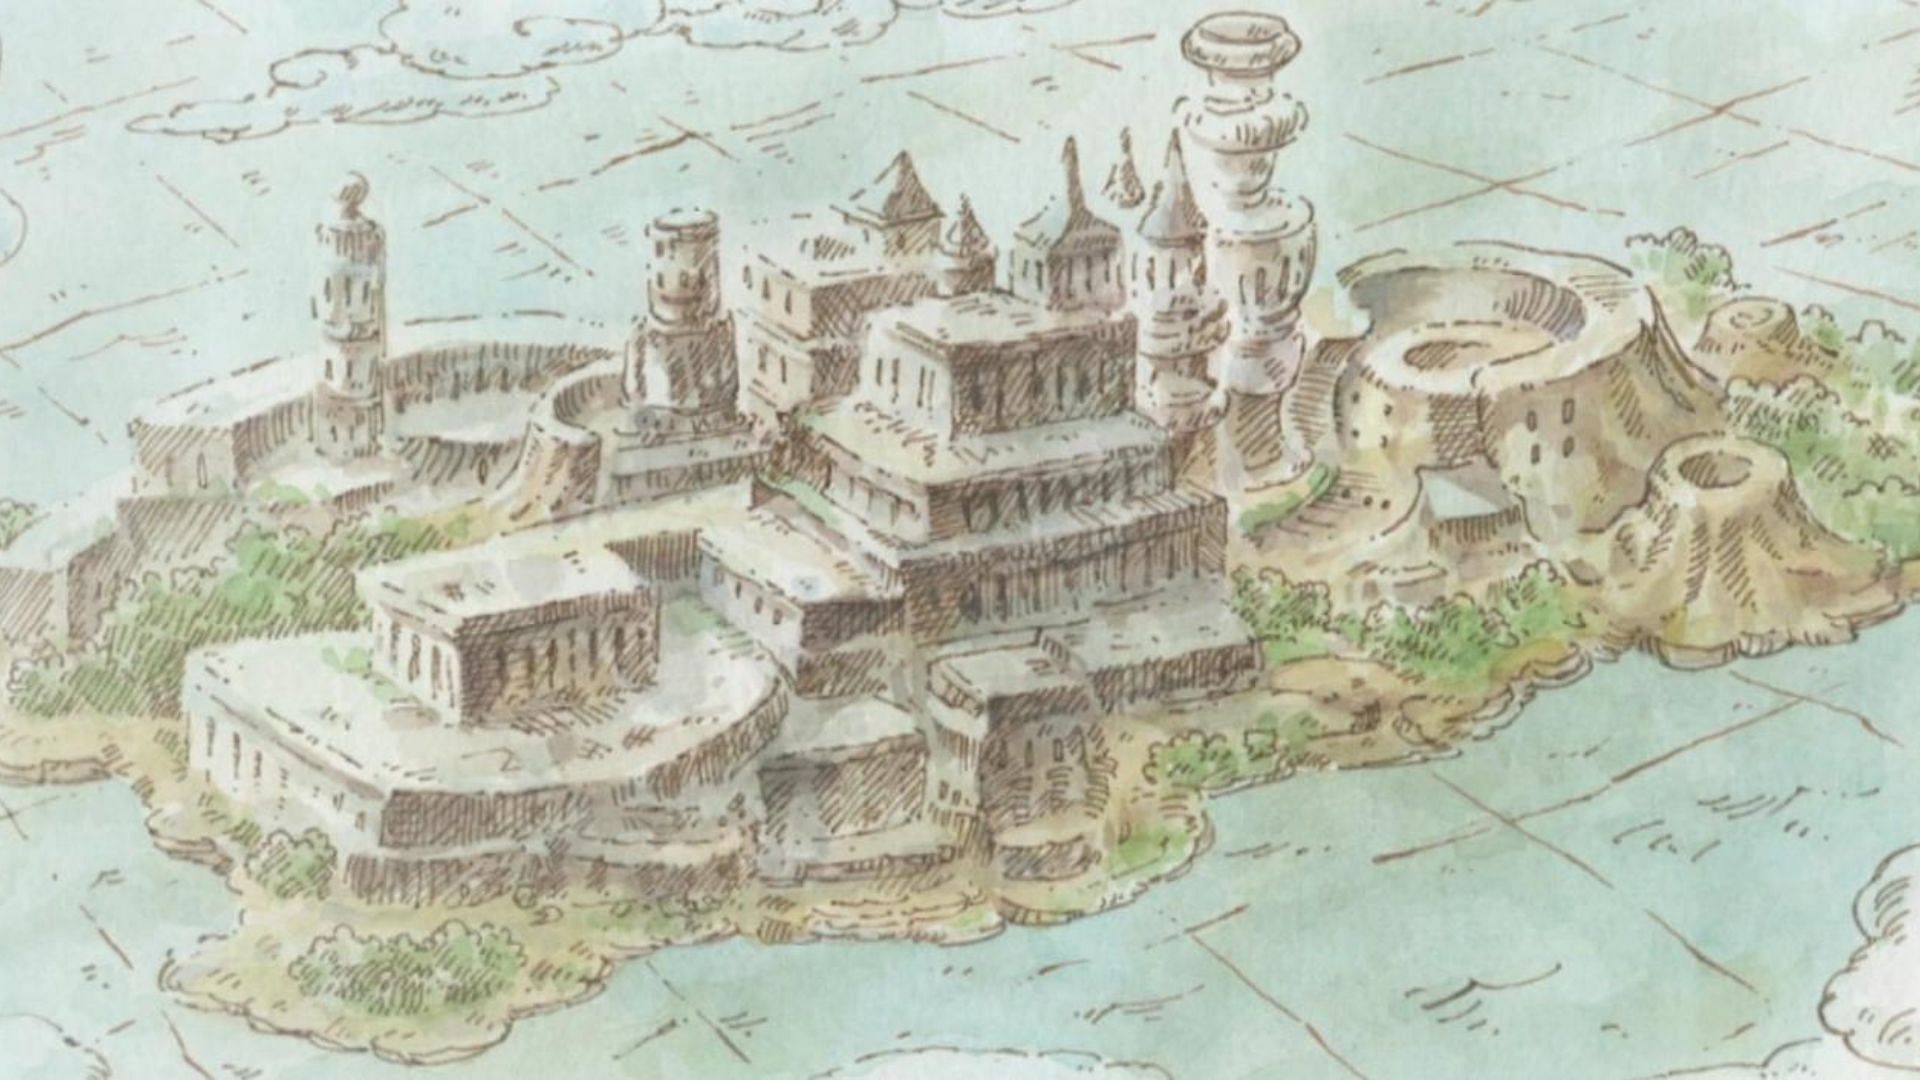 The Ancient Kingdom as shown in the series (Image via Toei Animation)